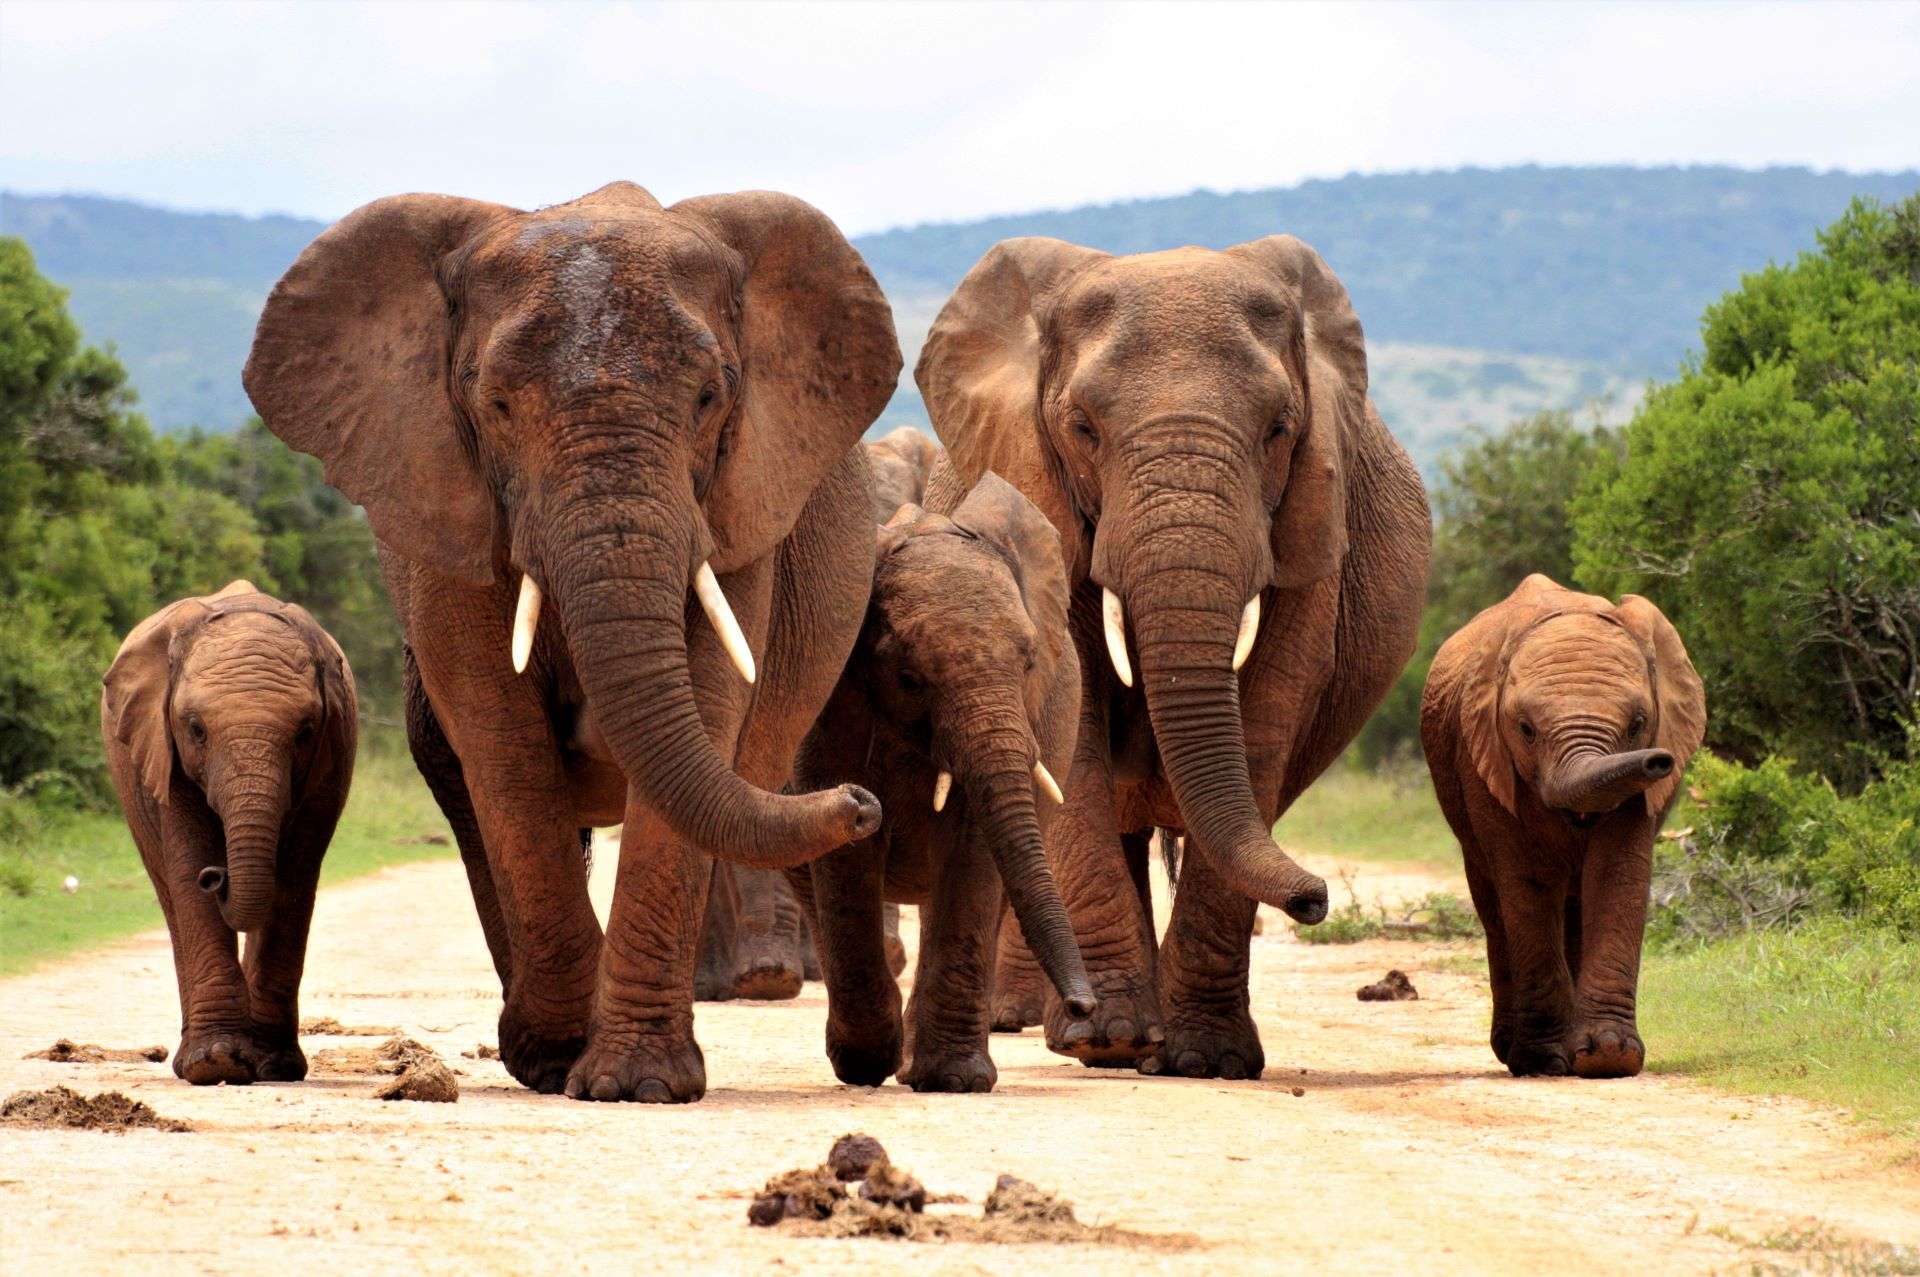 Elephants in a herd approach the camera while waving their trunks taken at South Africa's Addo Elephant National Park